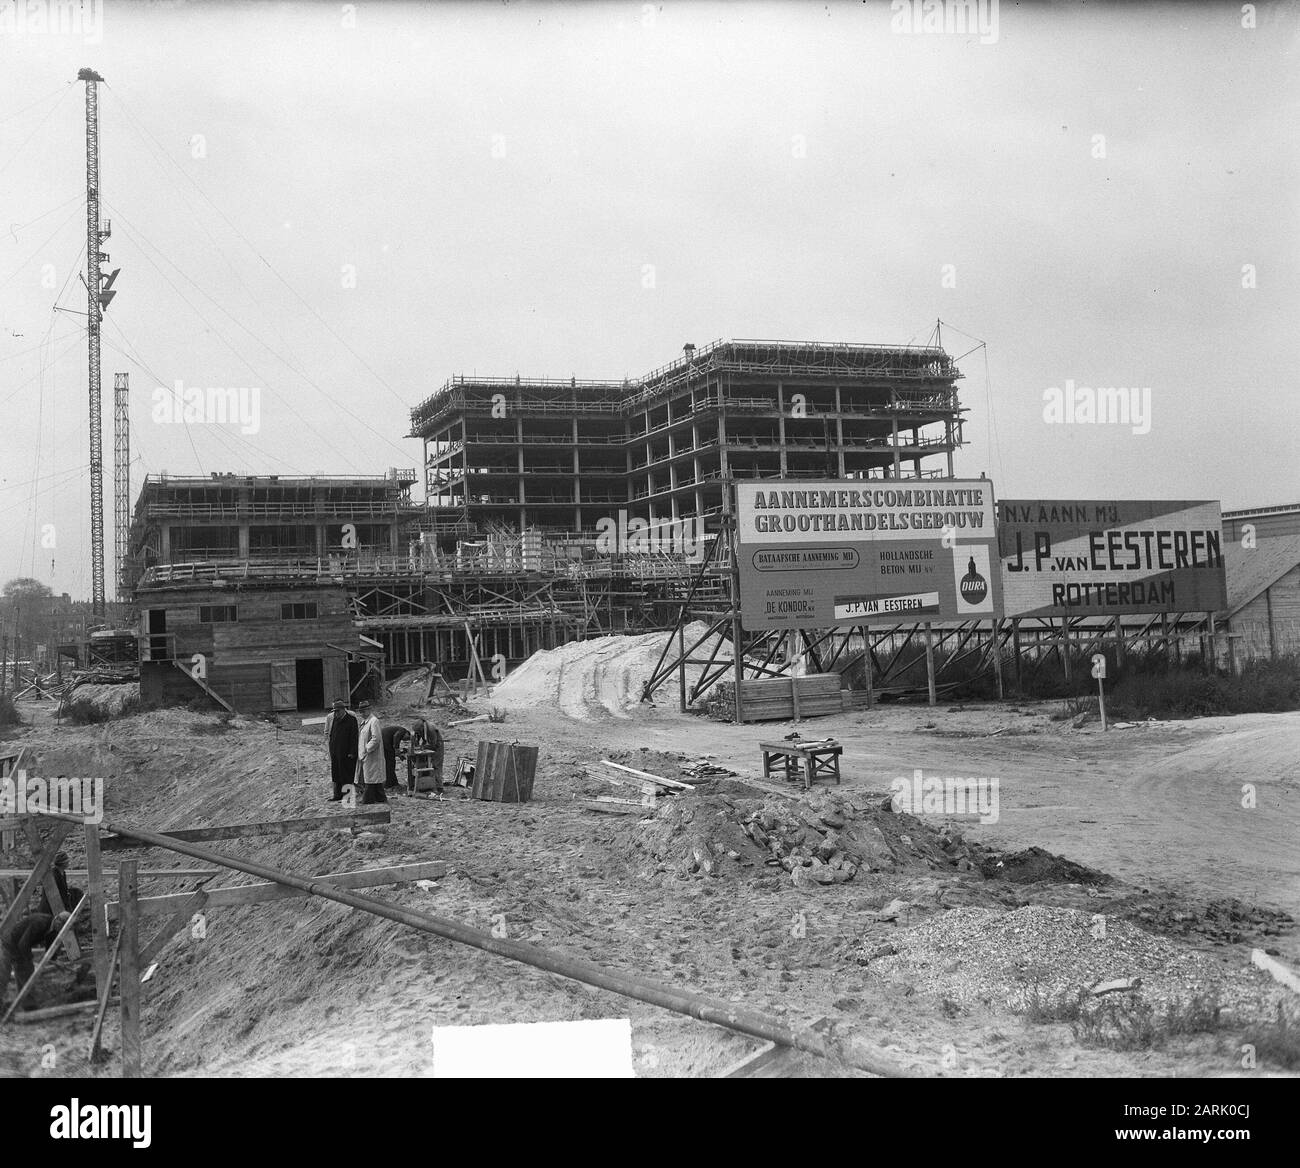 Groothandelsgebouw in Rotterdam under construction Annotation: The architects are Huig A. Maaskant and Willem van Tijen Date: October 9, 1950 Location: Rotterdam, Zuid-Holland Keywords: wholesale buildings, office buildings Stock Photo